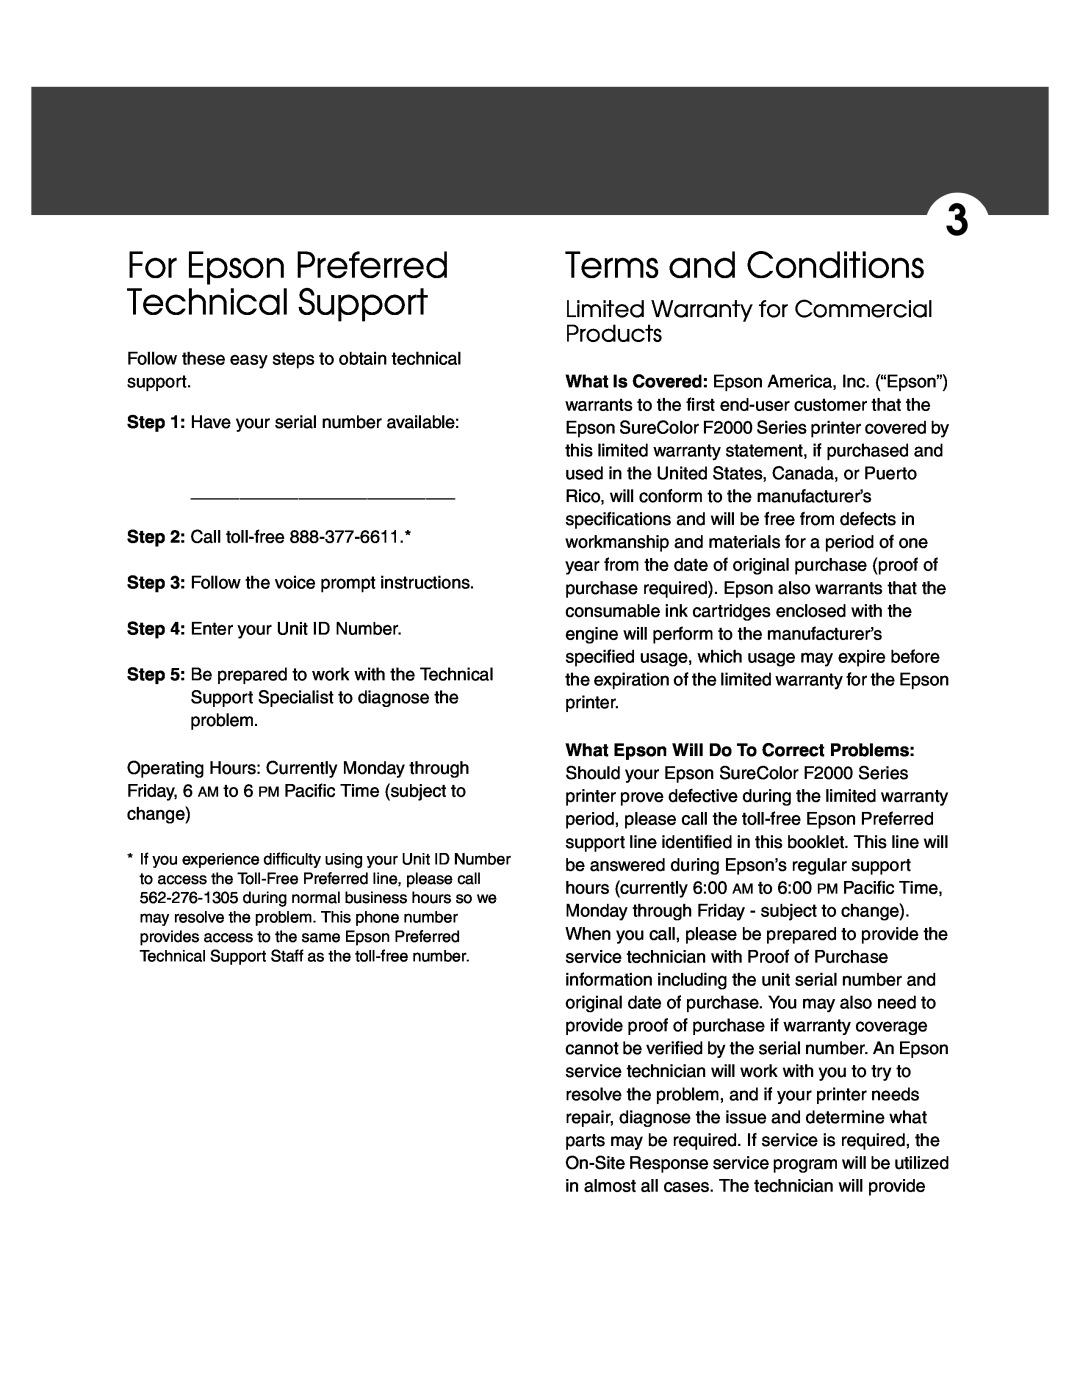 Epson F2000 warranty For Epson Preferred Technical Support, Terms and Conditions, What Epson Will Do To Correct Problems 